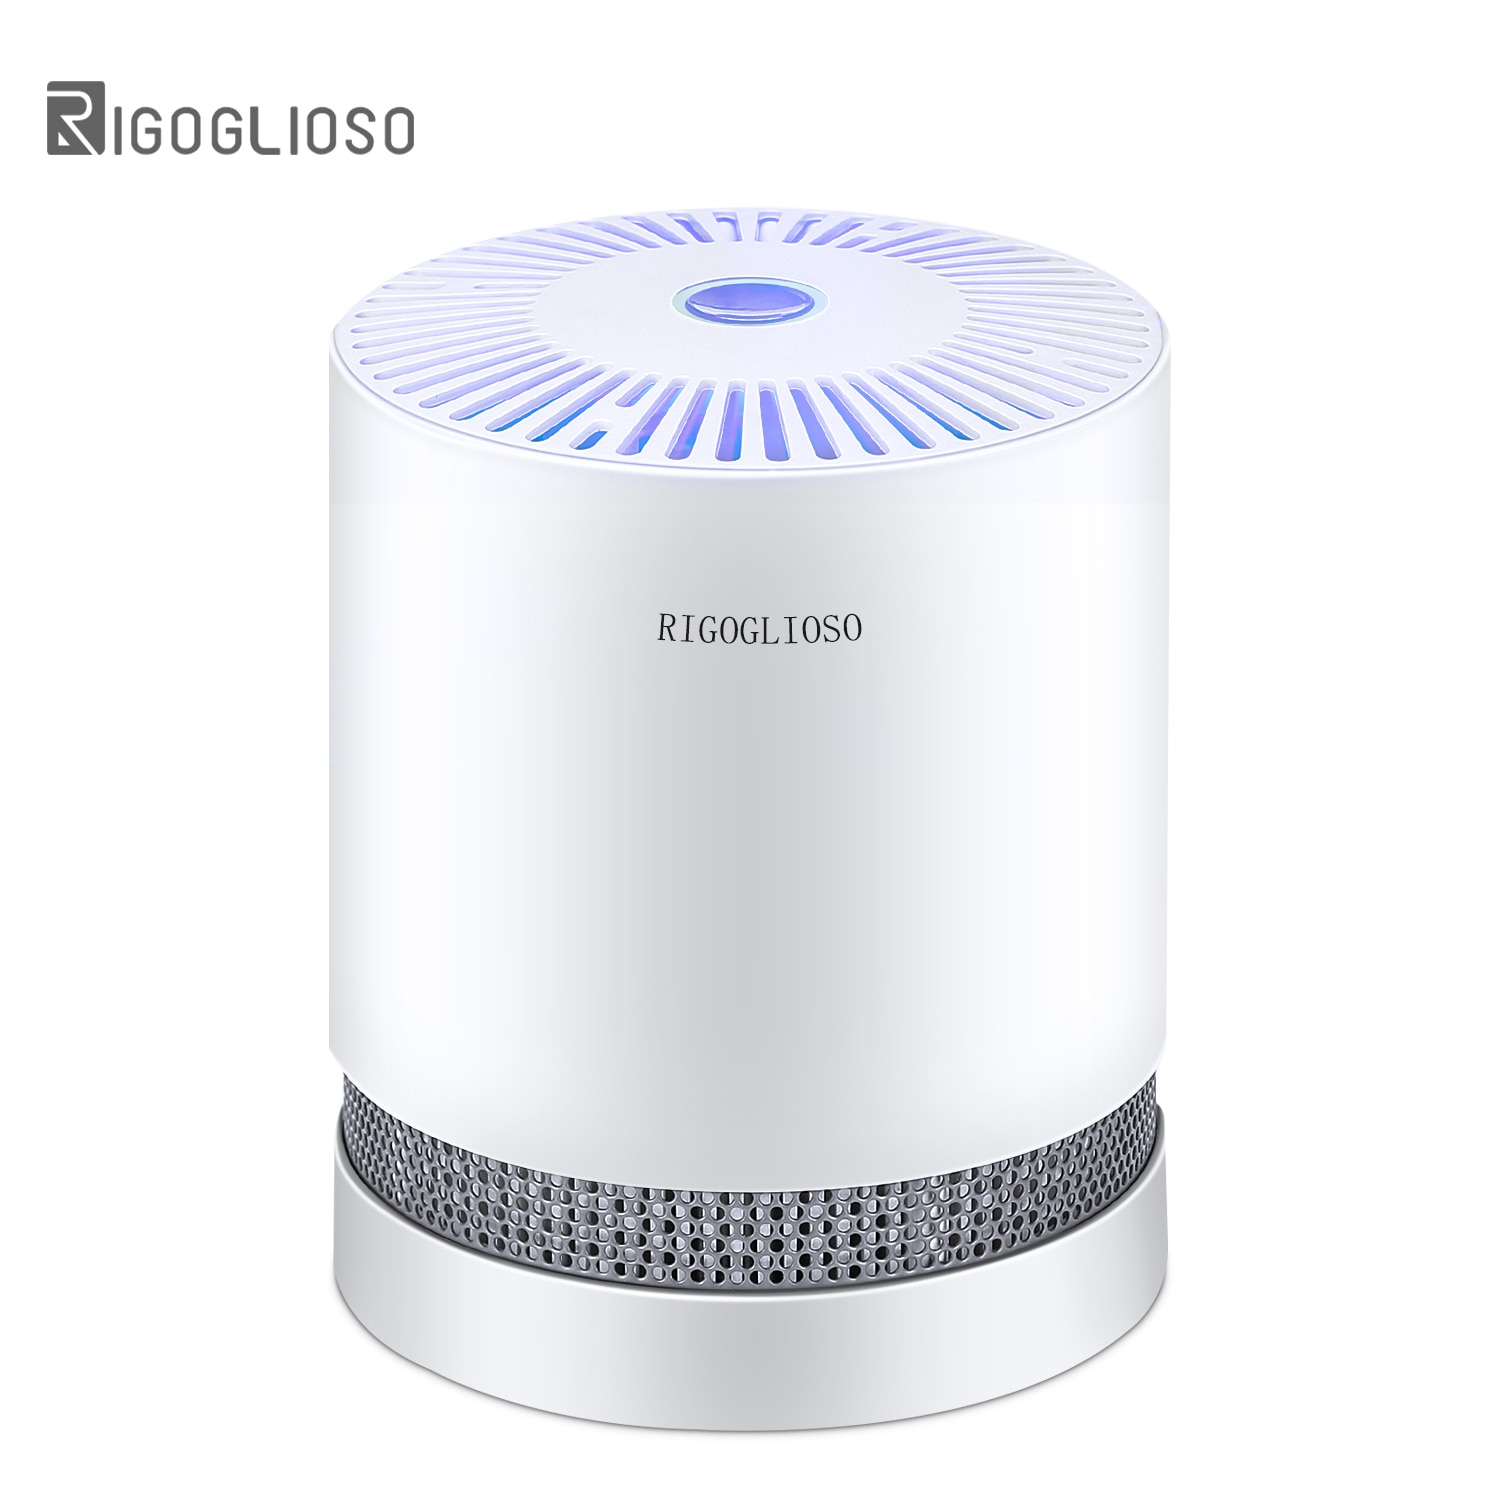 RIGOGLIOSO Air Purifier For Home True HEPA Filters Compact Desktop Purifiers Filtration with Night Light Air Cleaner GL2109